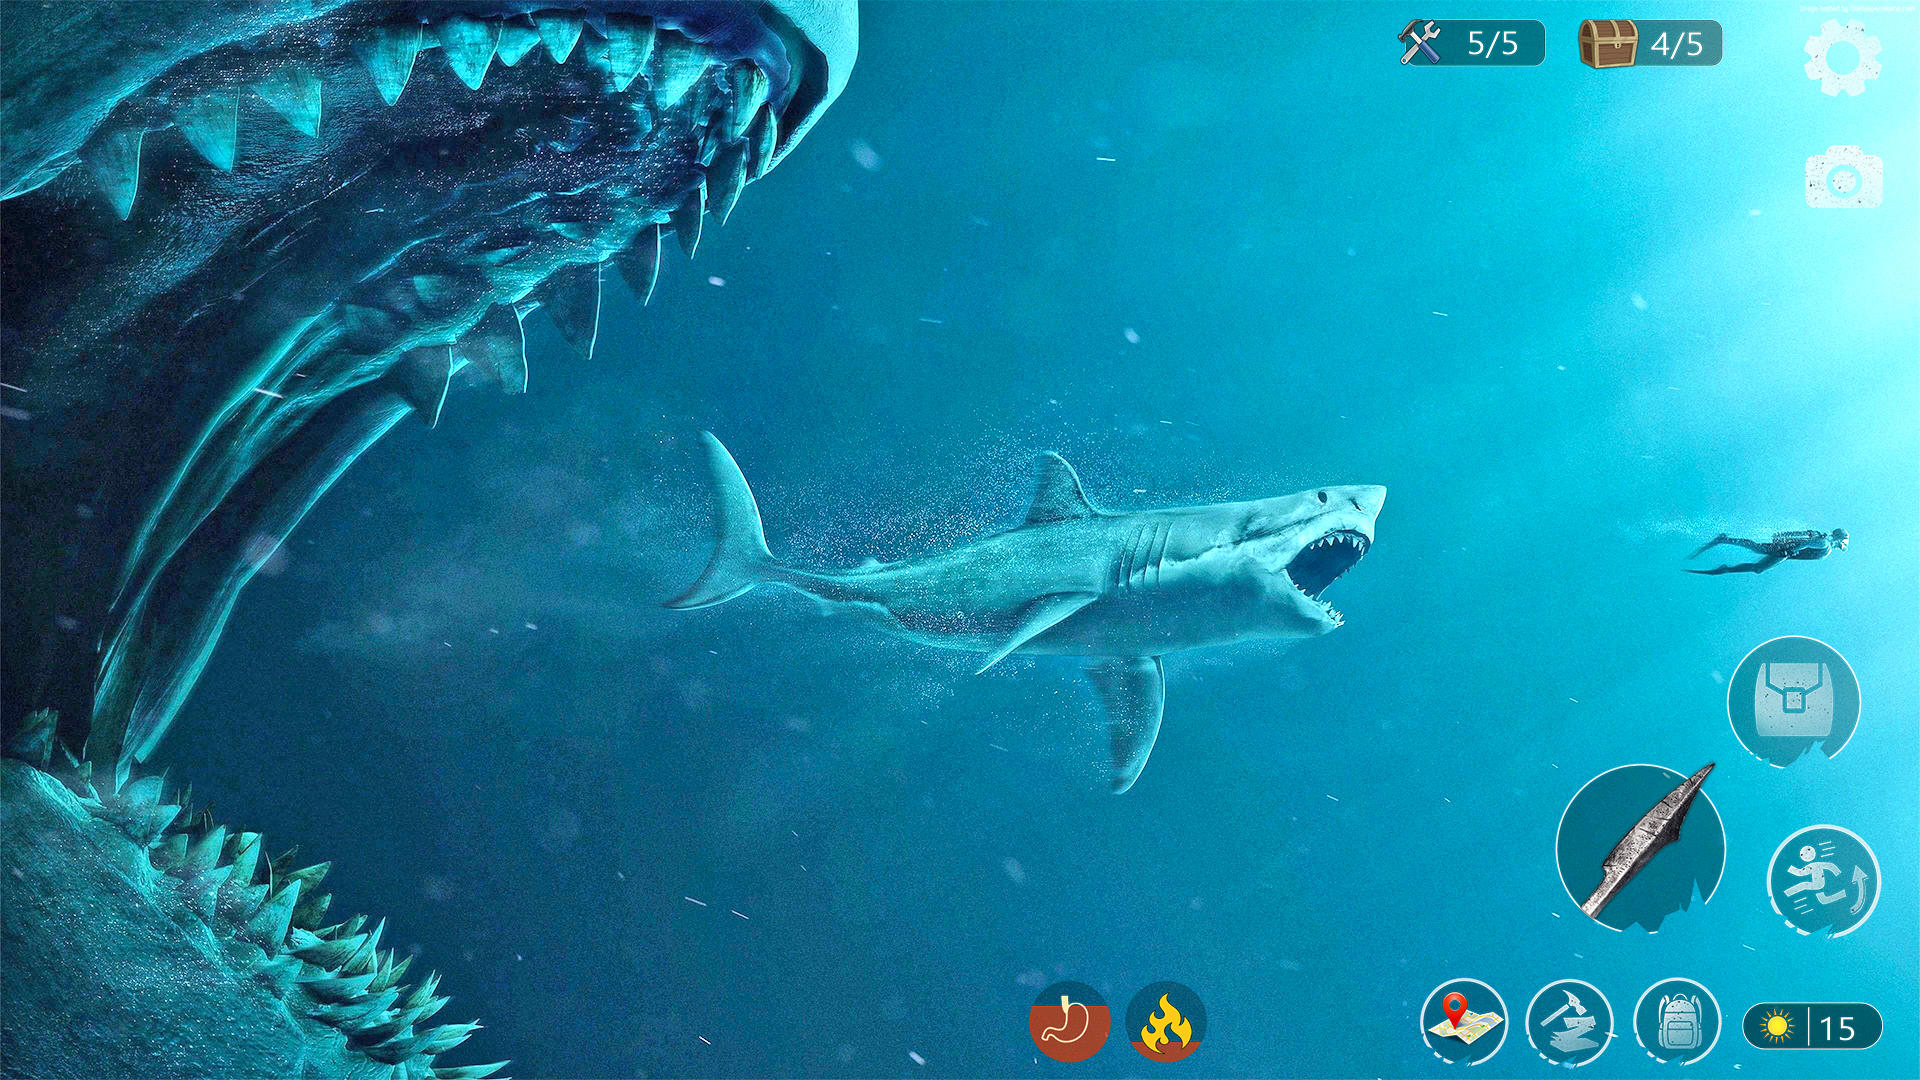 ANGRY SHARKS free online game on